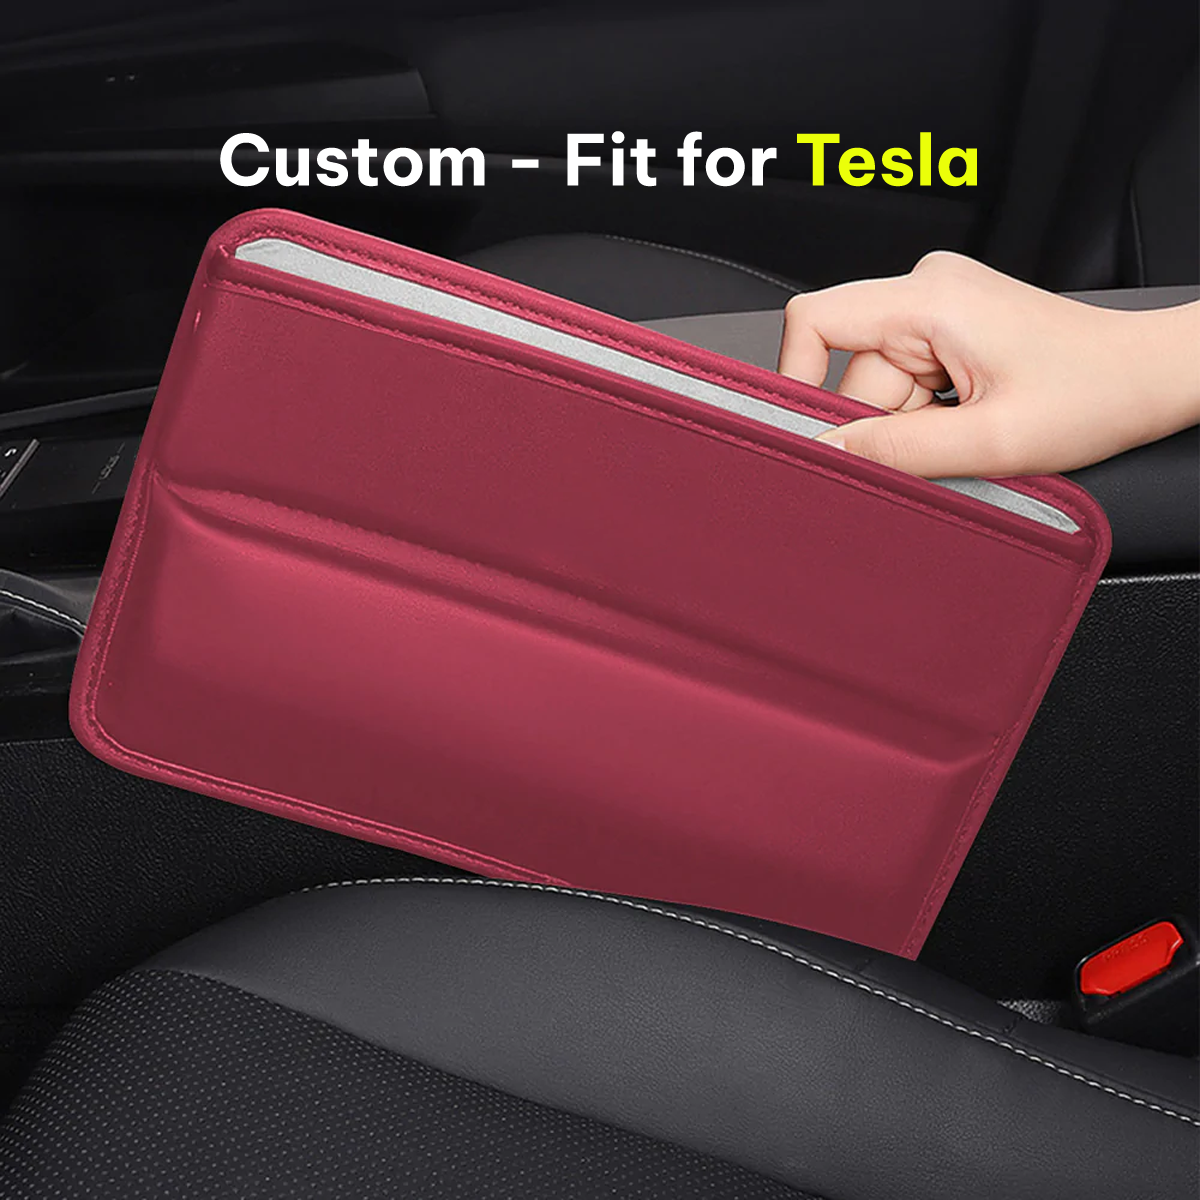 Car Seat Gap Filler Organizer, Custom-Fit For Car, Multifunctional PU Leather Console Side Pocket Organizer for Cellphones, Cards, Wallets, Keys DLTY226